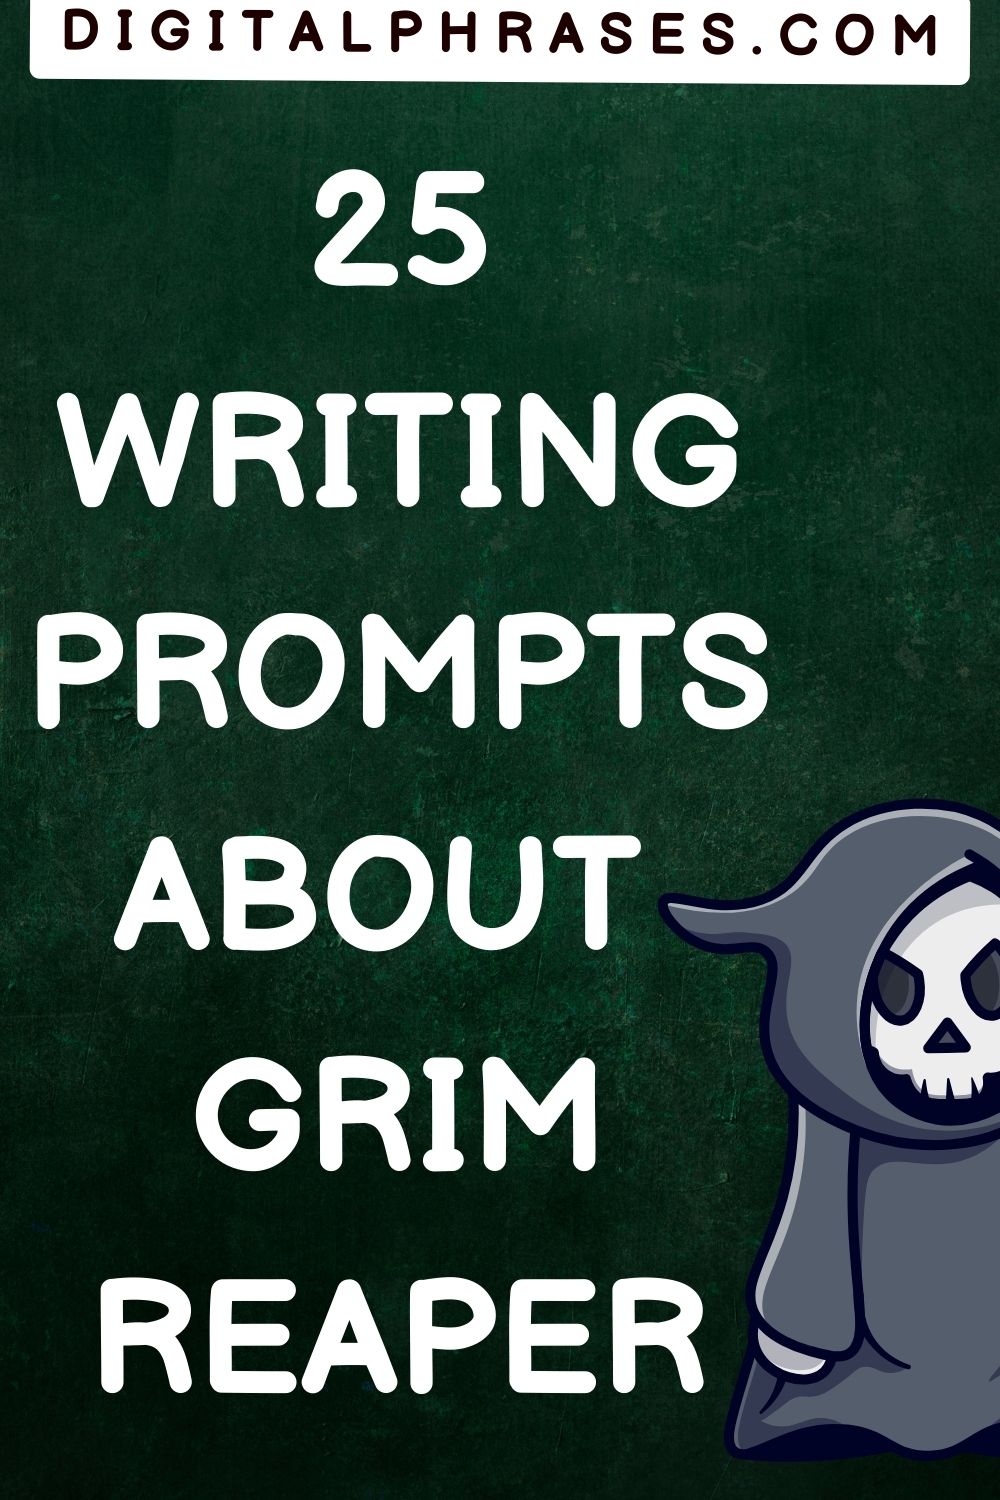 green background image with text - 25 Writing Prompts About Grim Reaper